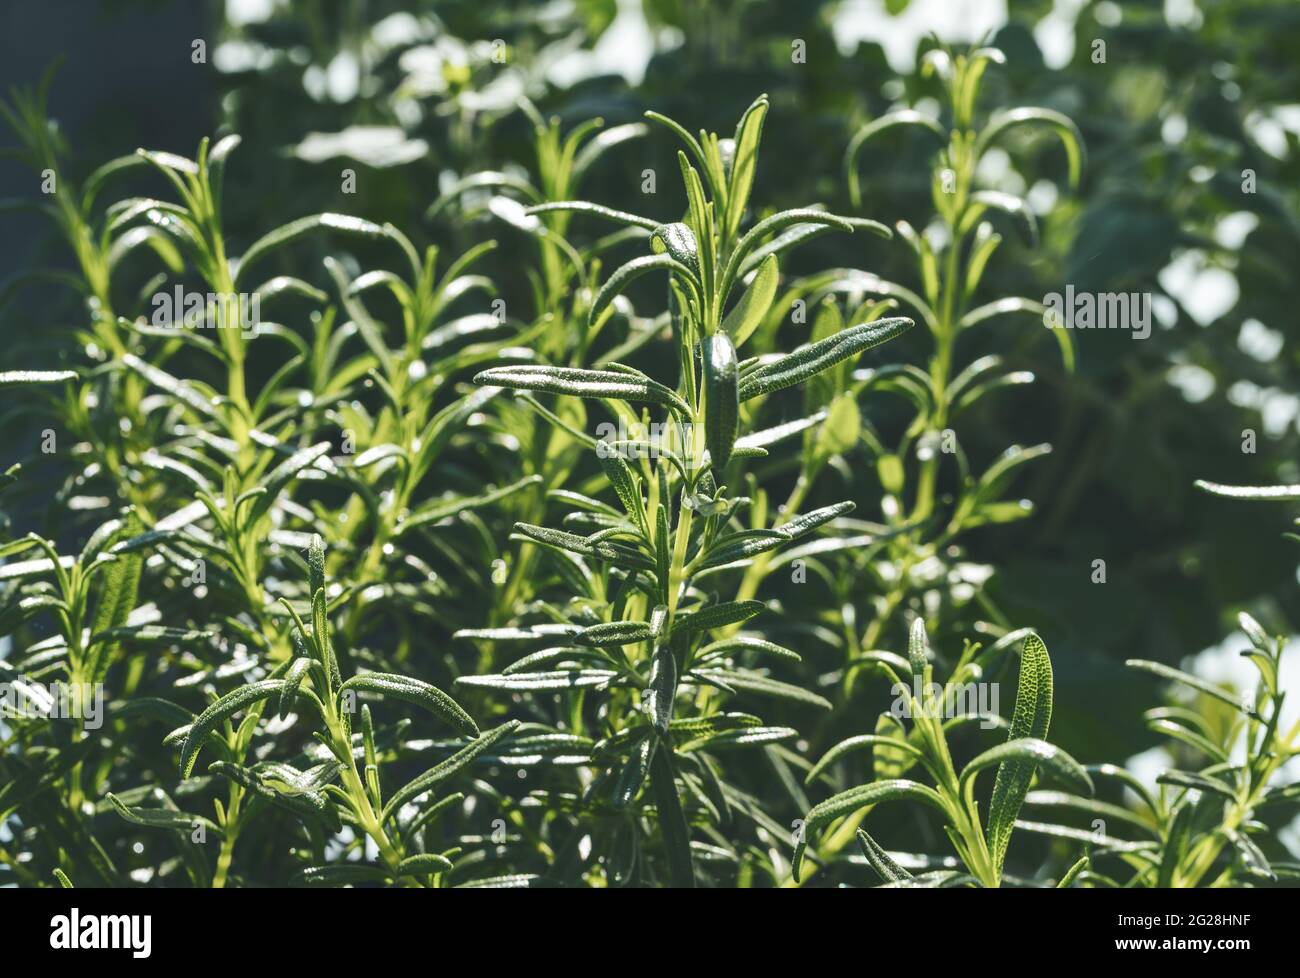 close-up view of rosemary plant in garden Stock Photo